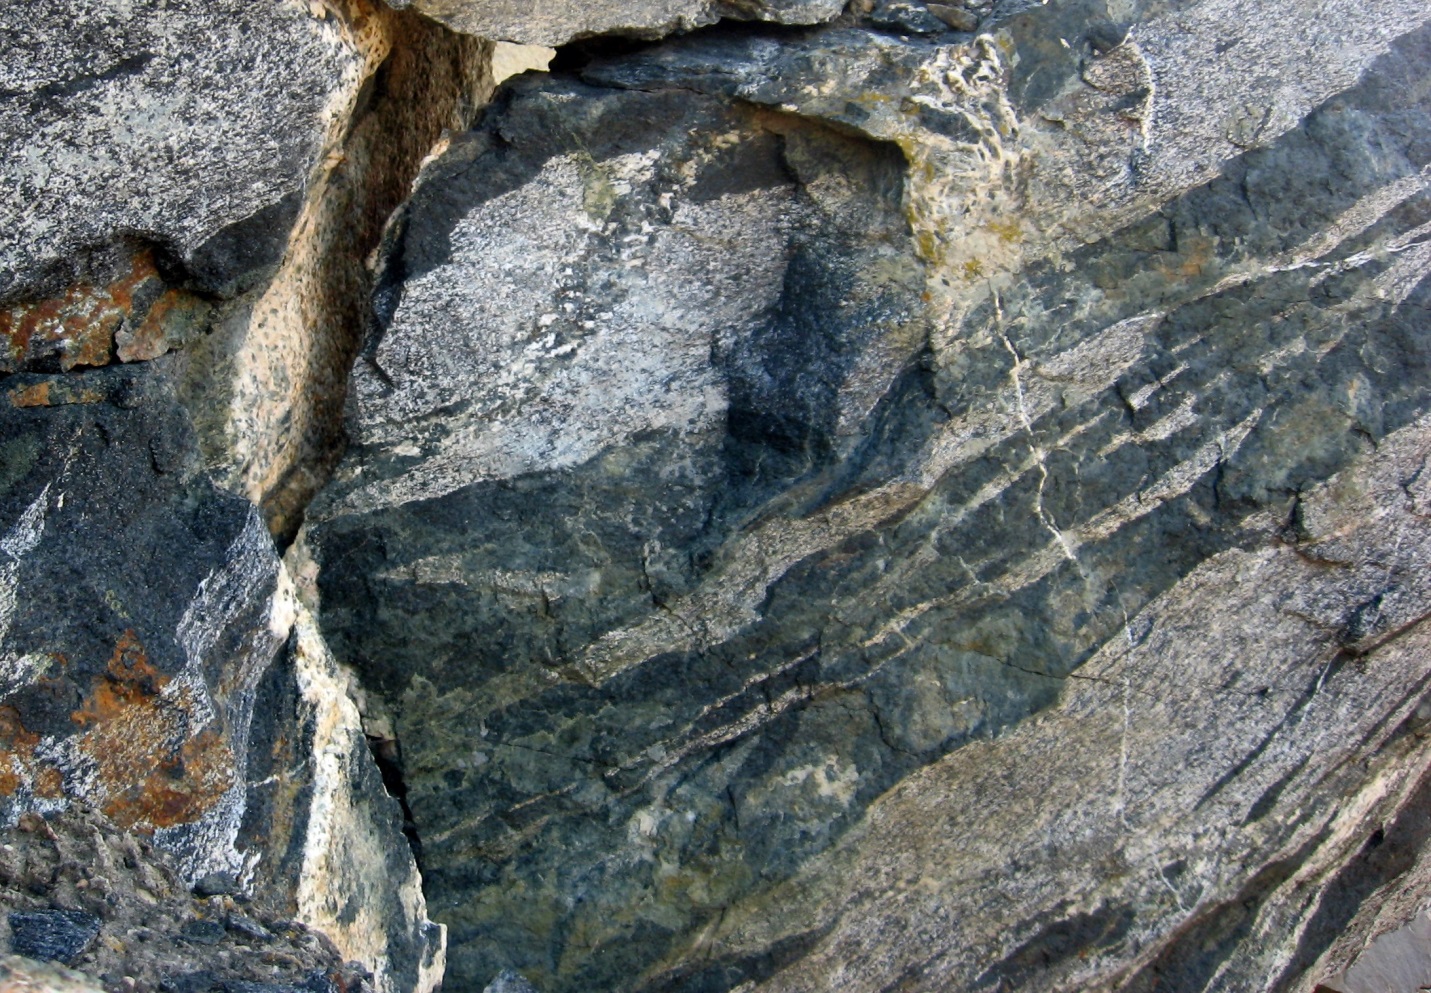 Photograph of Metamorphic rock (gneiss) of the Okanagan Metamorphic and Igneous Complex at Skaha Lake, BC. The dark bands are amphibole-rich, the light bands are feldspar-rich.